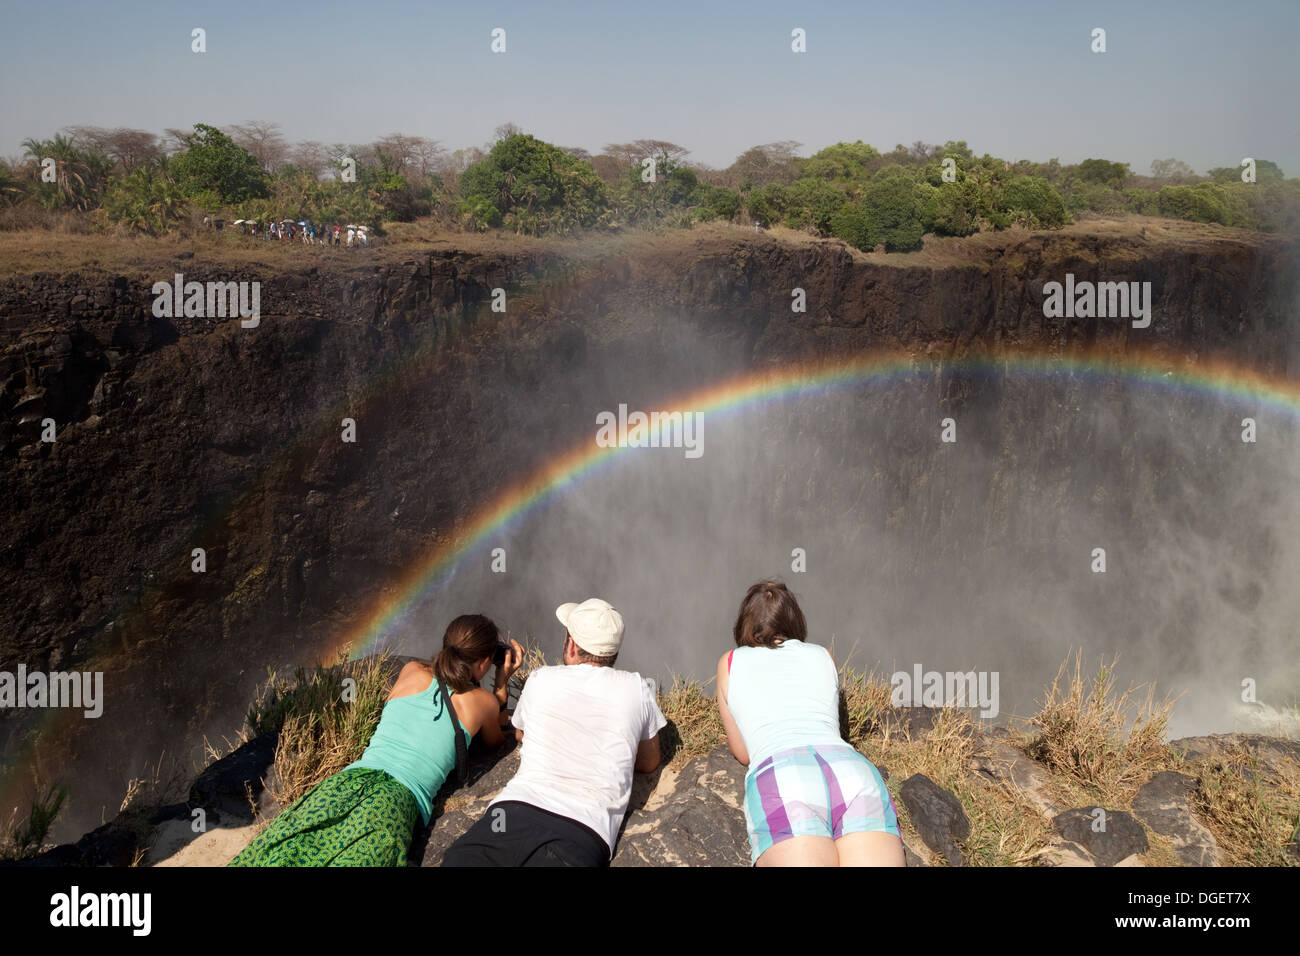 Victoria Falls Zambia, three tourists on Livingstone island, Zambia looking at the rainbow and the Victoria Falls, Africa Stock Photo